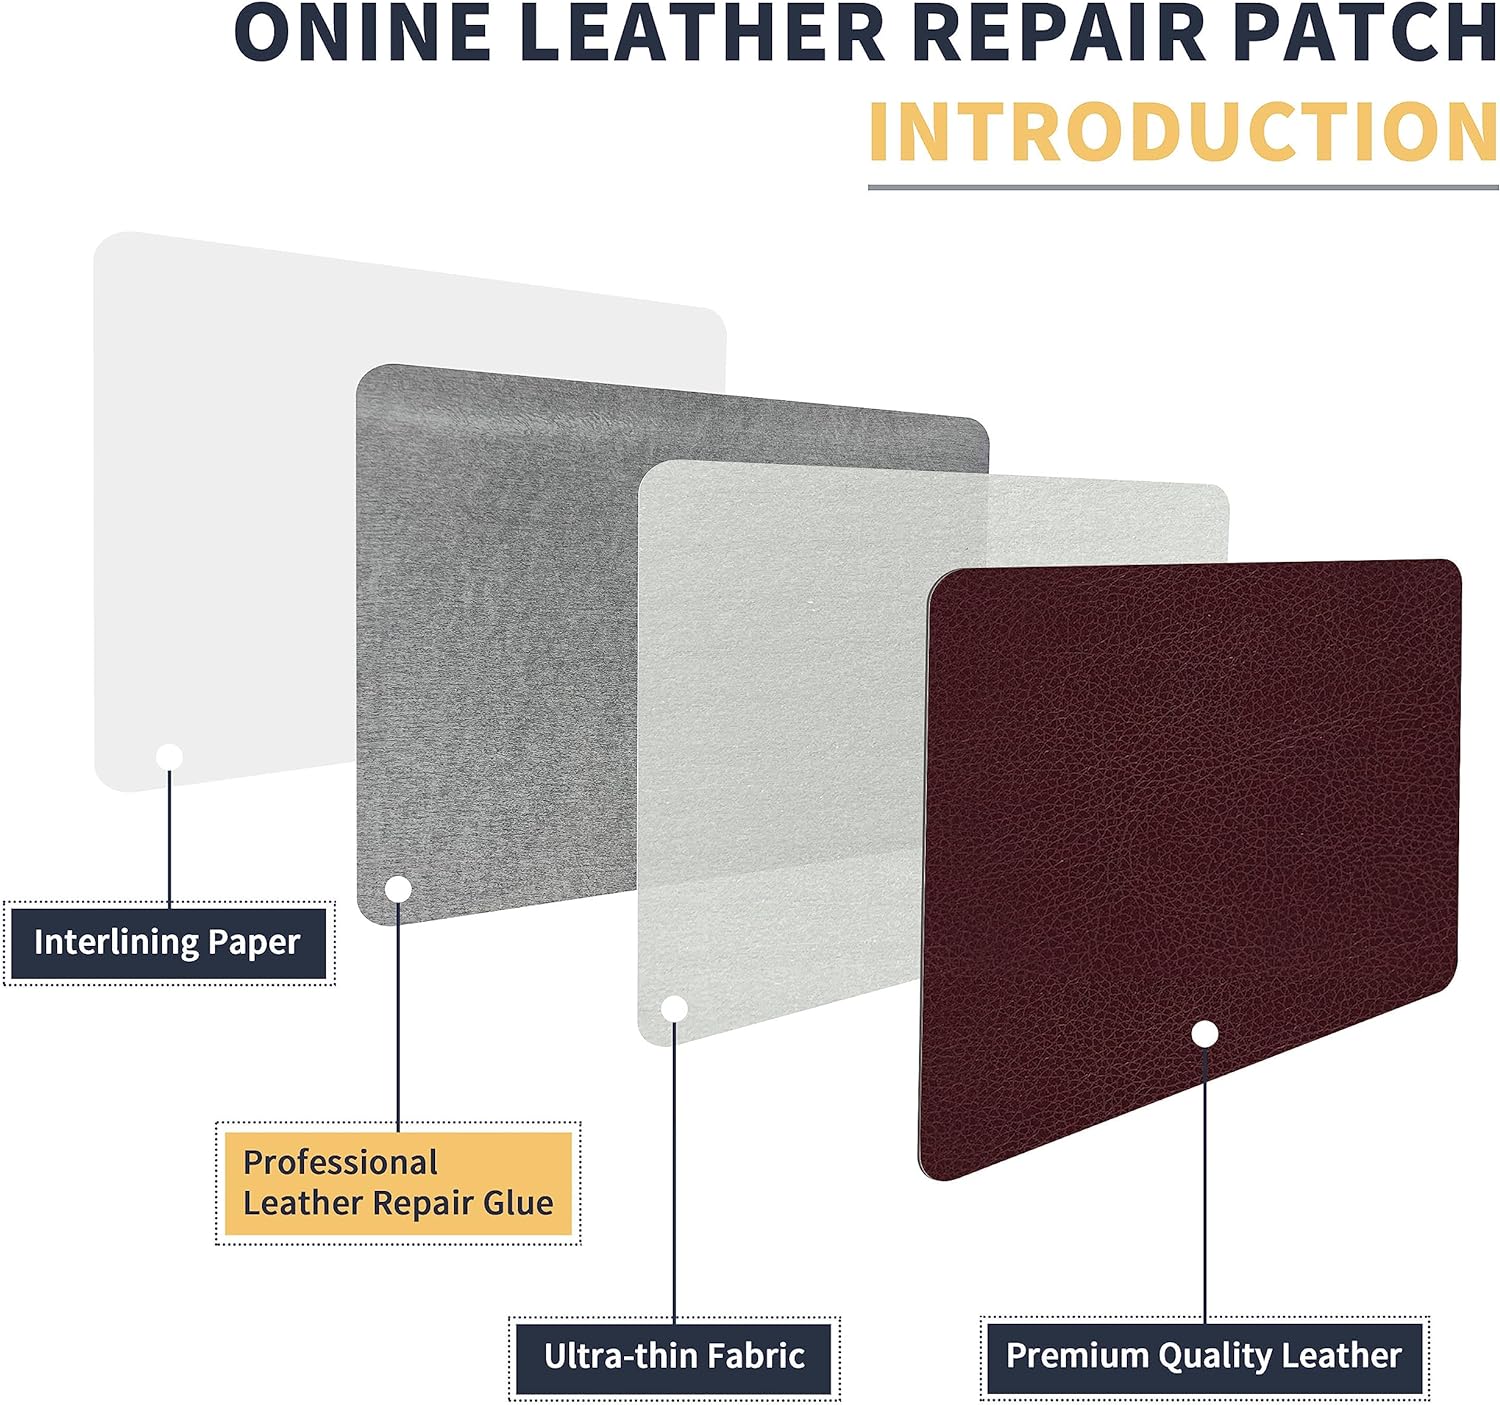 Leather Repair Patch，Leather Repair Tape, 3 x 60 inches Leather Repair  Patch for Furniture,Vinyl Repair kit，Leather Couch Patch，for Sofas,  Furniture